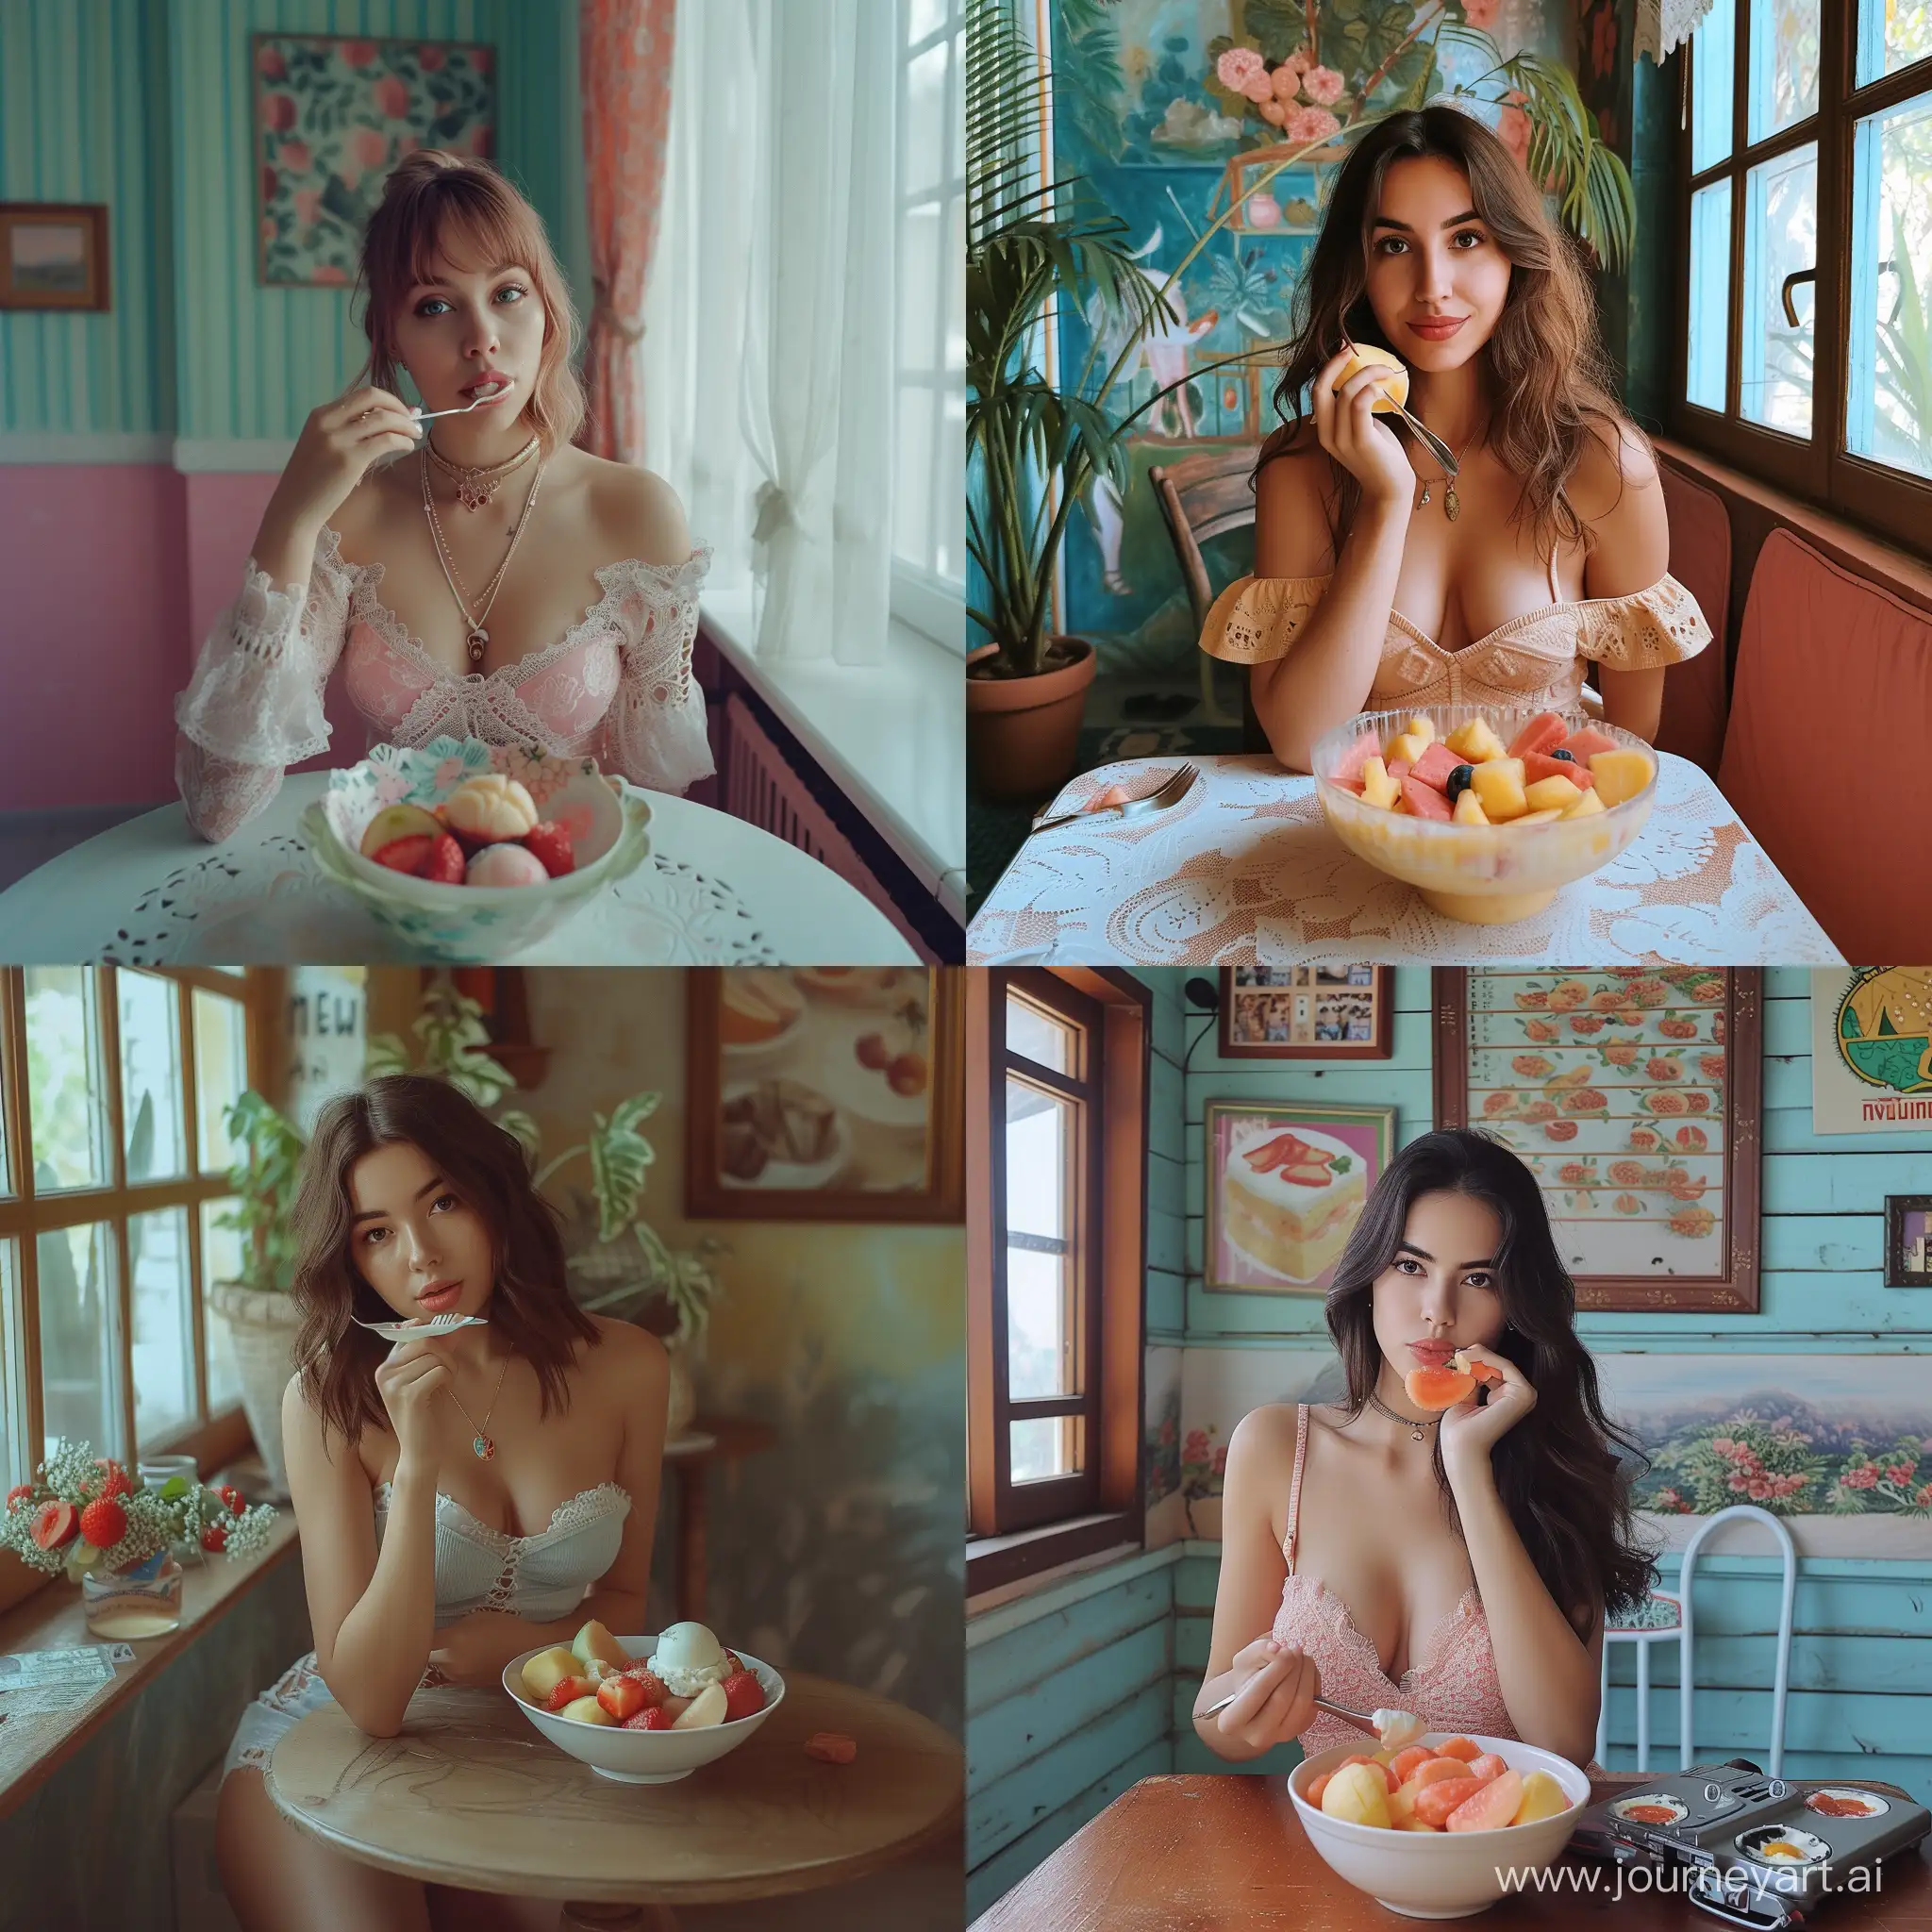 a woman sitting at a table eating a bowl of fruit, eating ice cream, anna nikonova aka newmilky, eating ice - cream,  eating cakes, pokimane, mukbang, belle delphine,  eating, young beautiful amouranth, eating camera pov, style of julia razumova